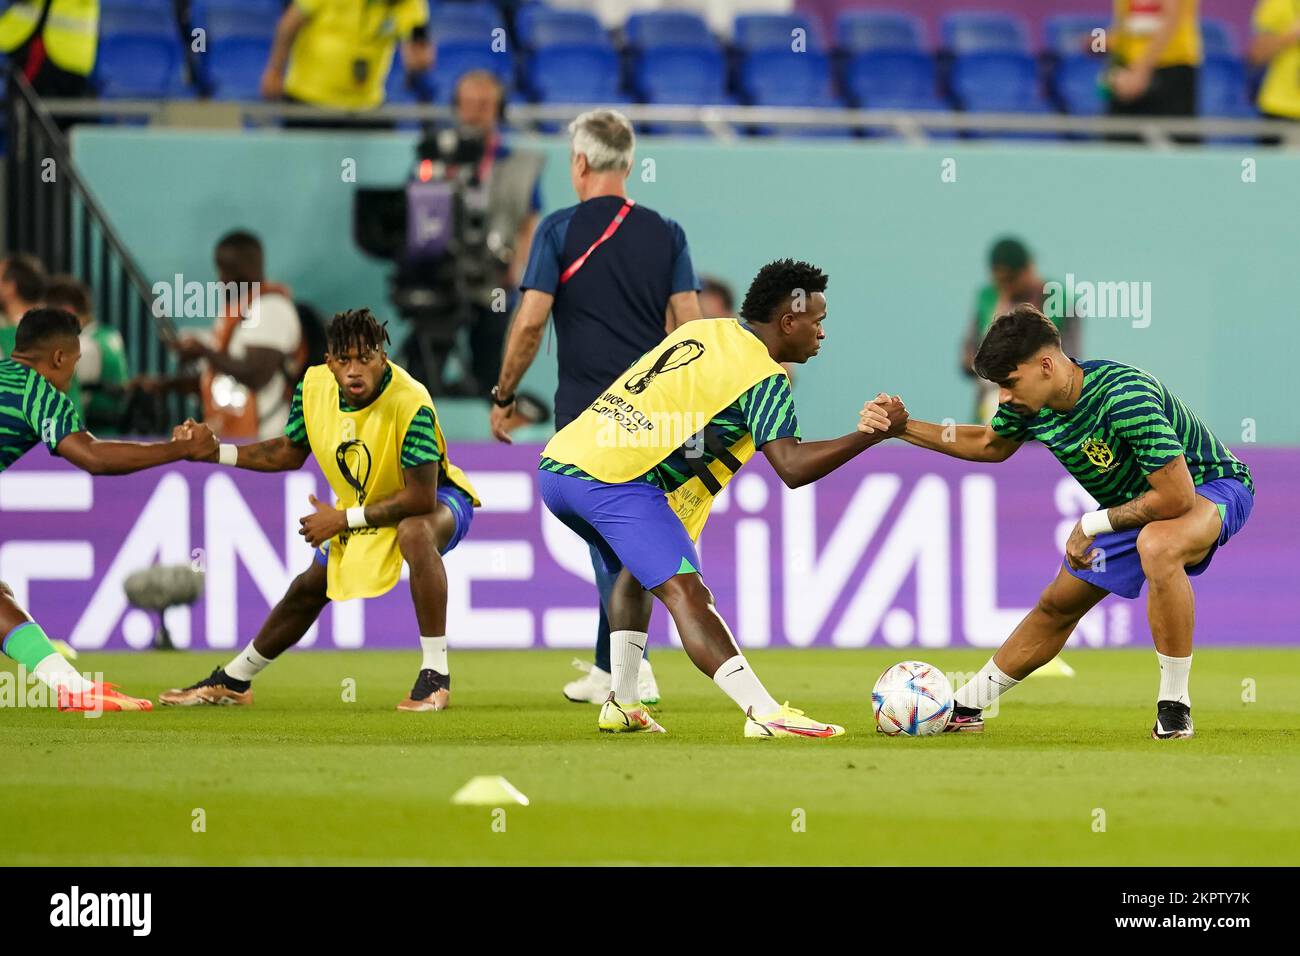 DOHA, QATAR - NOVEMBER 28: Players of Brazil warm up the FIFA World Cup Qatar 2022 group G match between Brazil and Switzerland at Stadium 974 on November 28, 2022 in Doha, Qatar. (Photo by Florencia Tan Jun/PxImages) Stock Photo